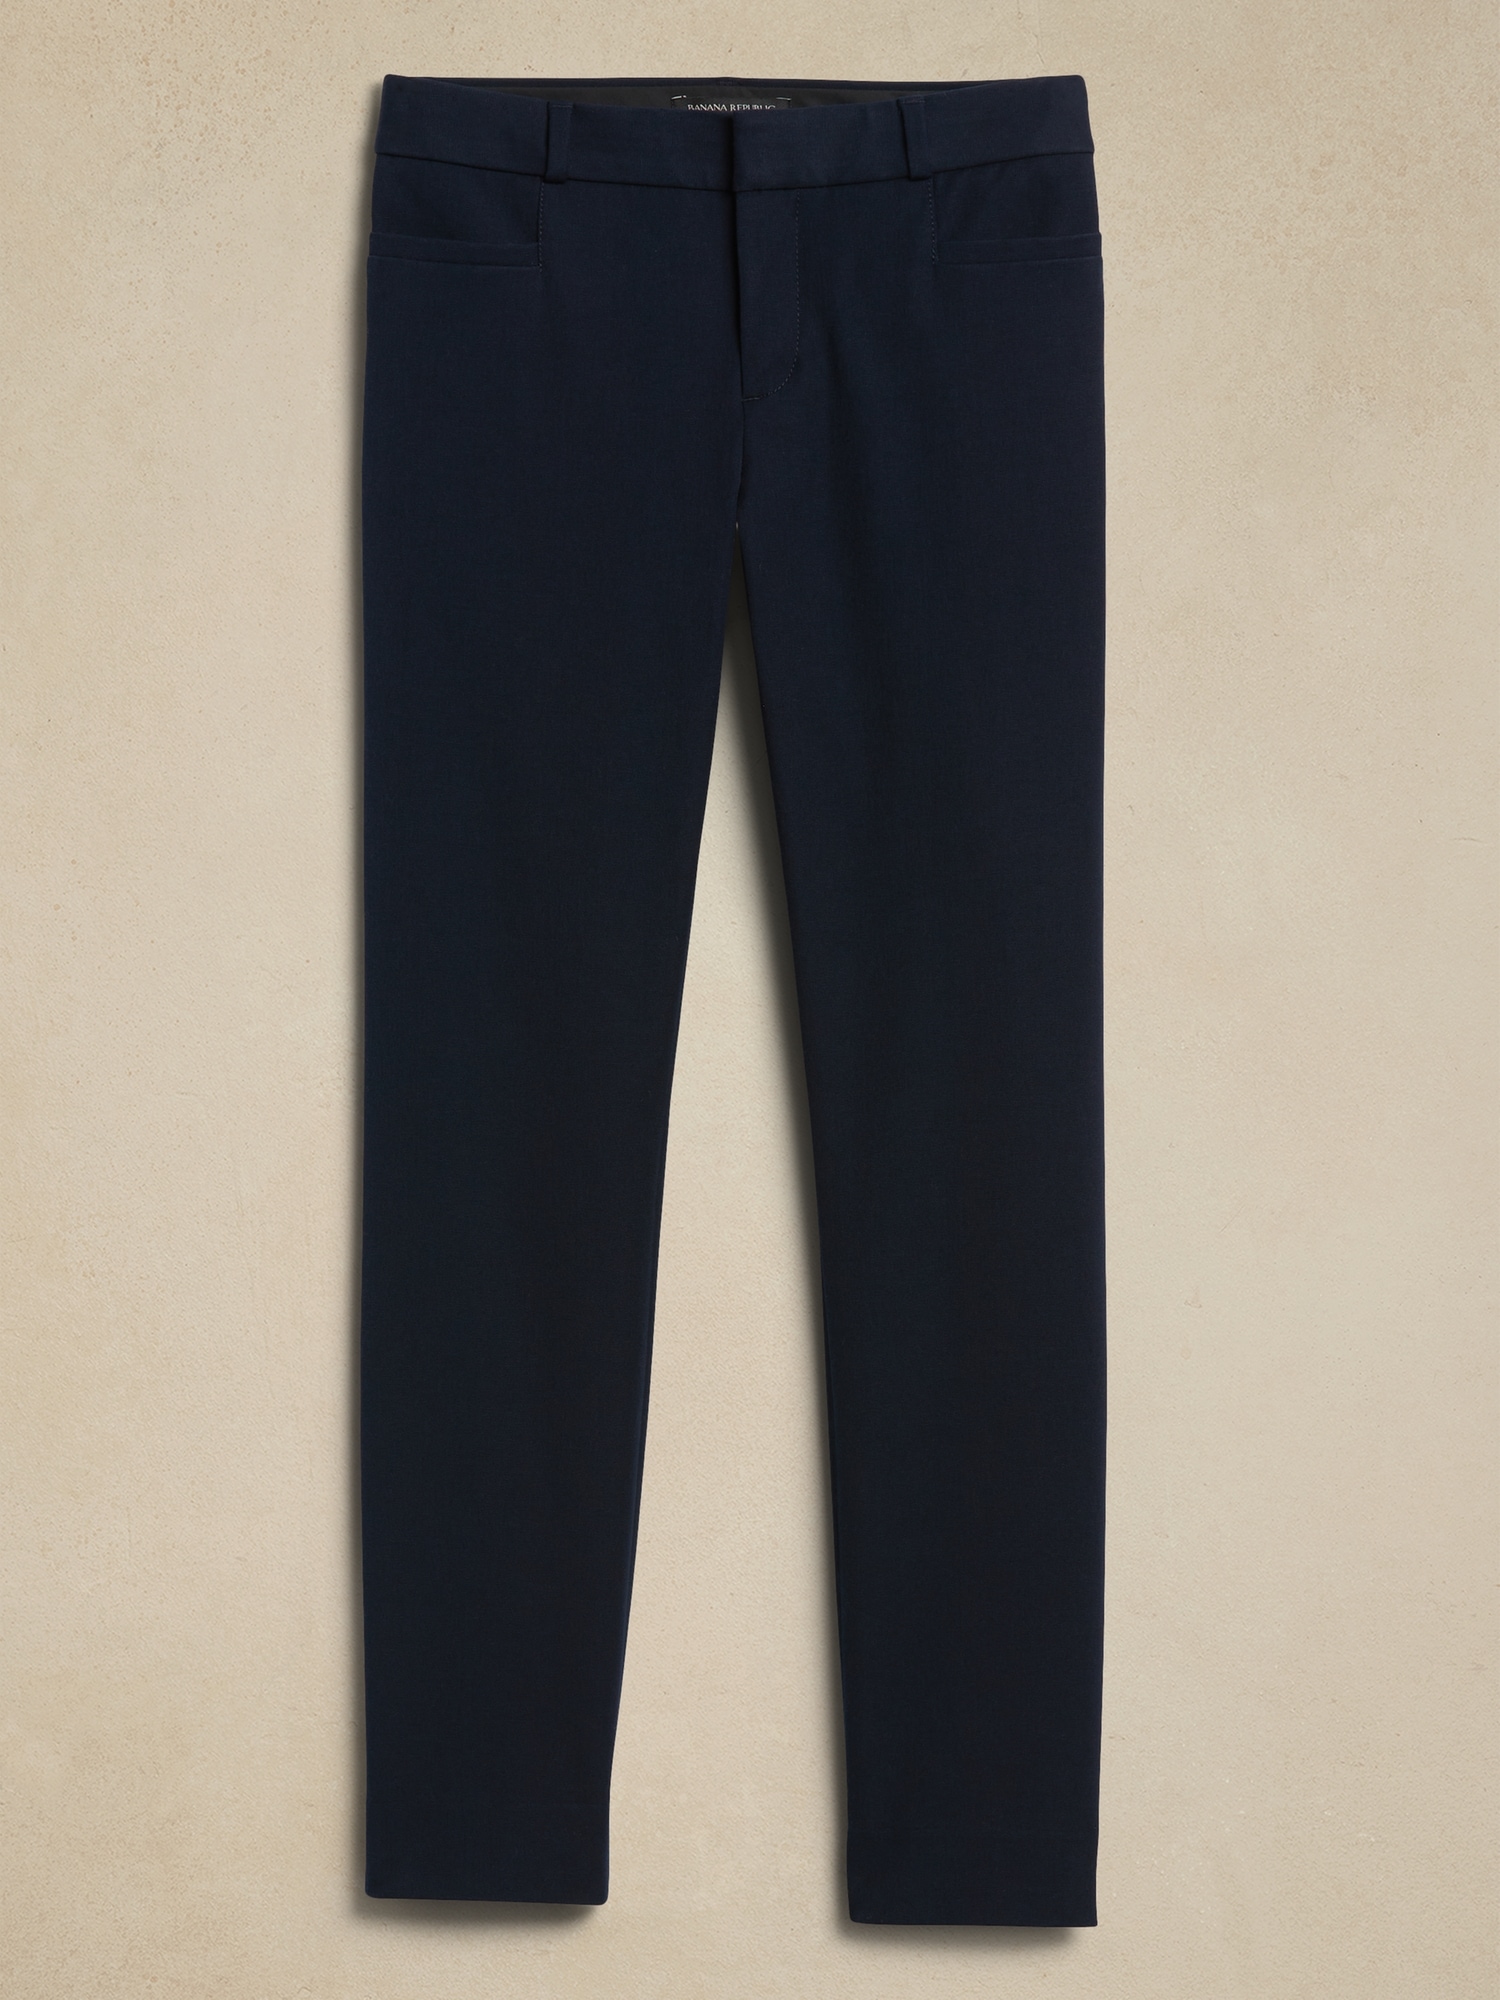 Review: Banana Republic Sloan Fit Slim Ankle Pants in Navy - Stylish Petite